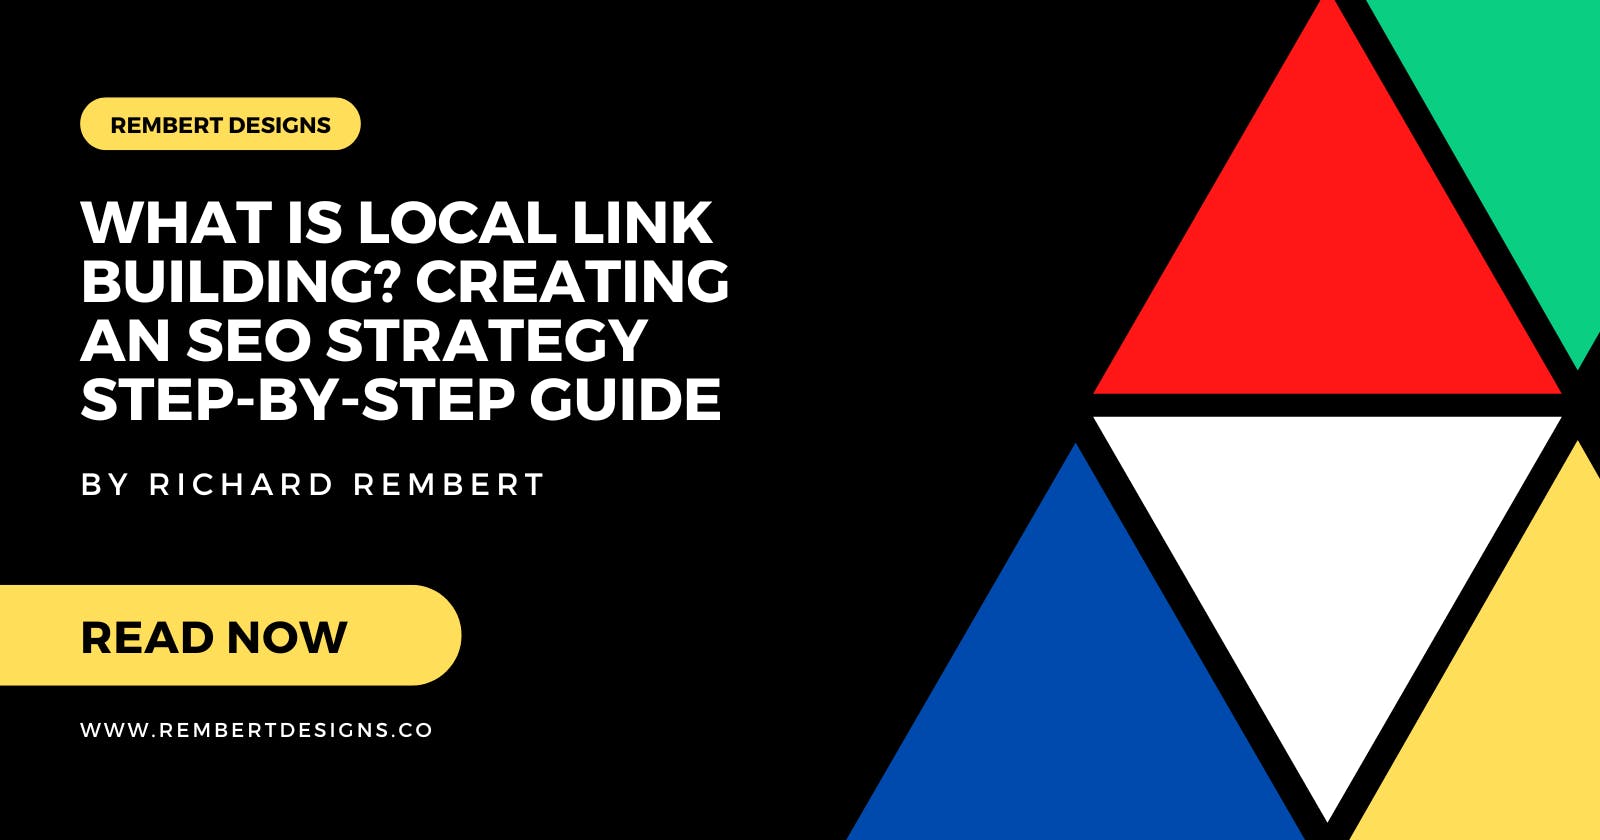 What is Local Link Building? Creating an SEO Strategy Step-by-Step Guide